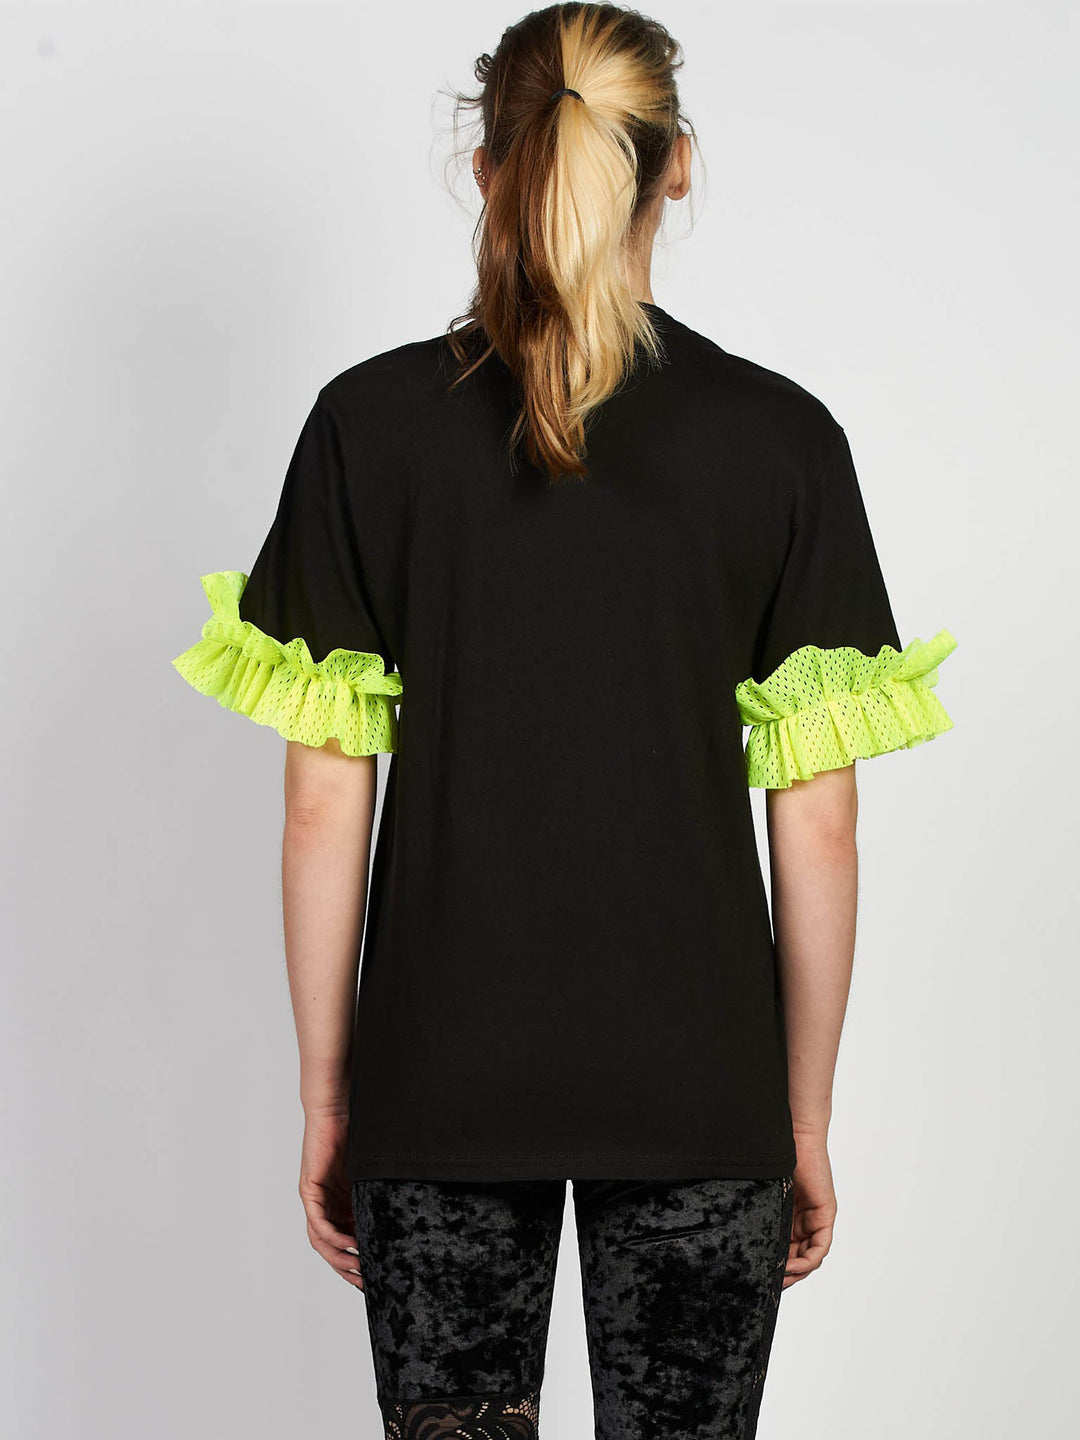 Tee Shirt with Logo and Neon Ruffle in Black (50% OFF)